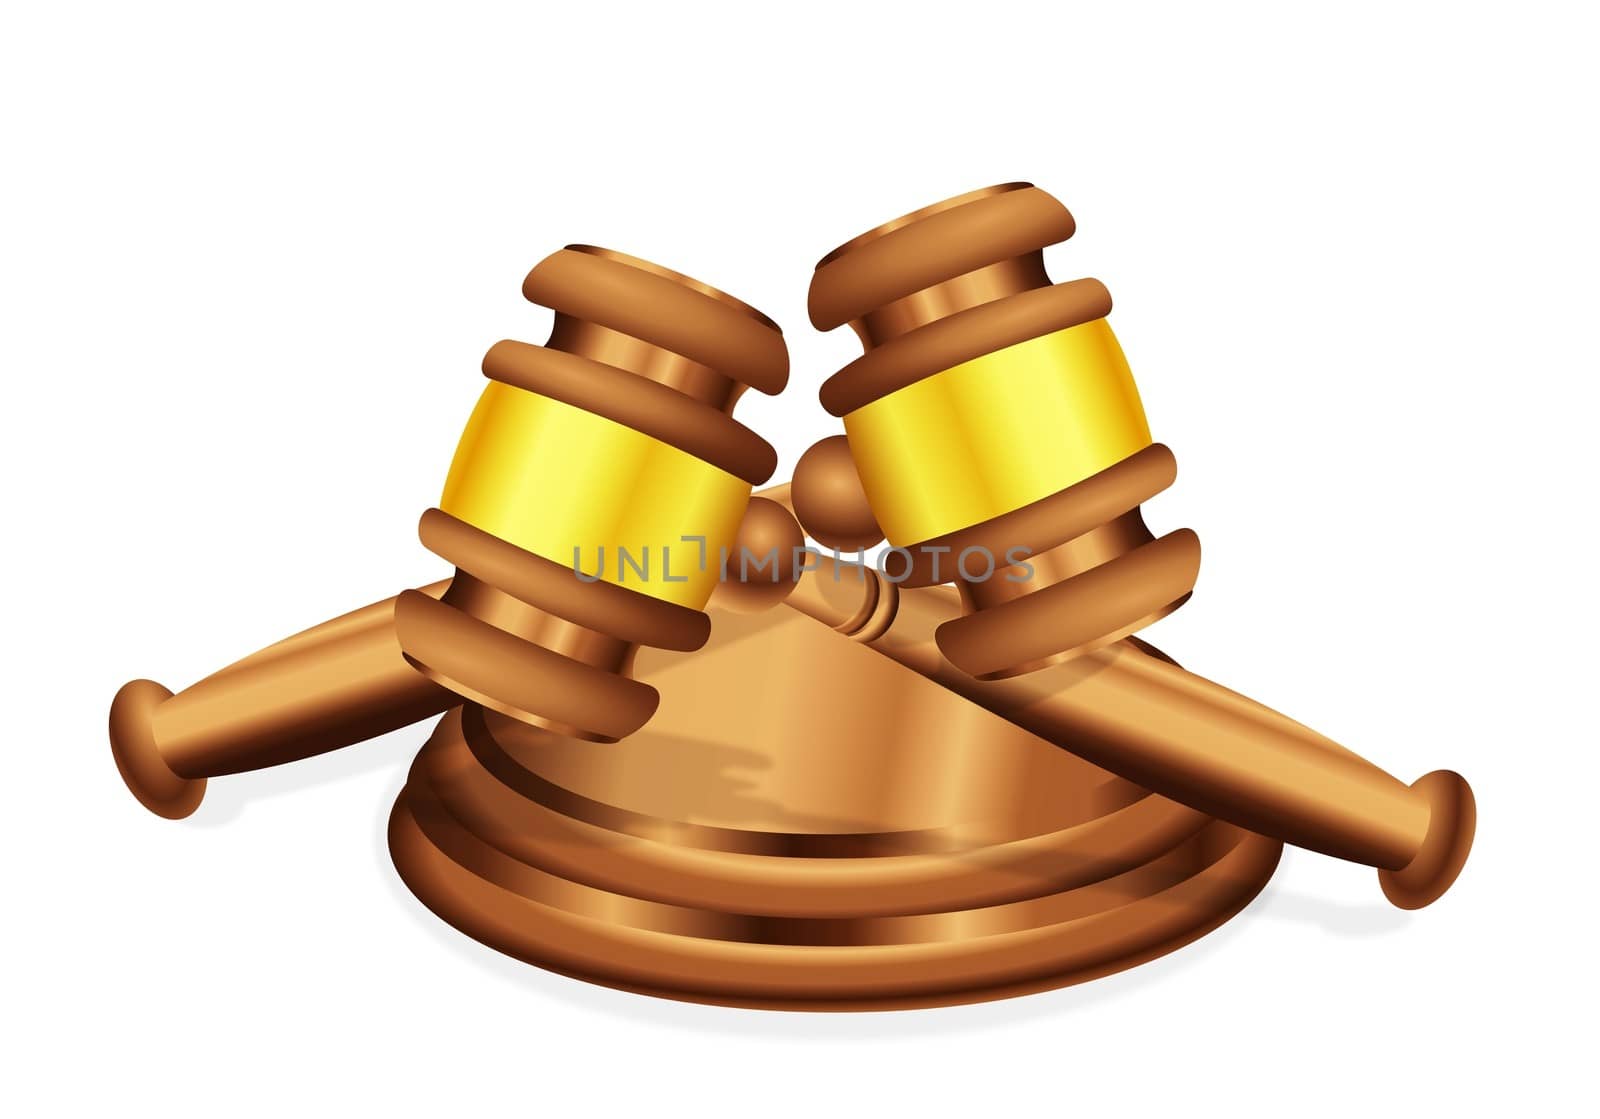 Two judge's gavel mallet lying crossed over each other, to signify either conflict or common decision
